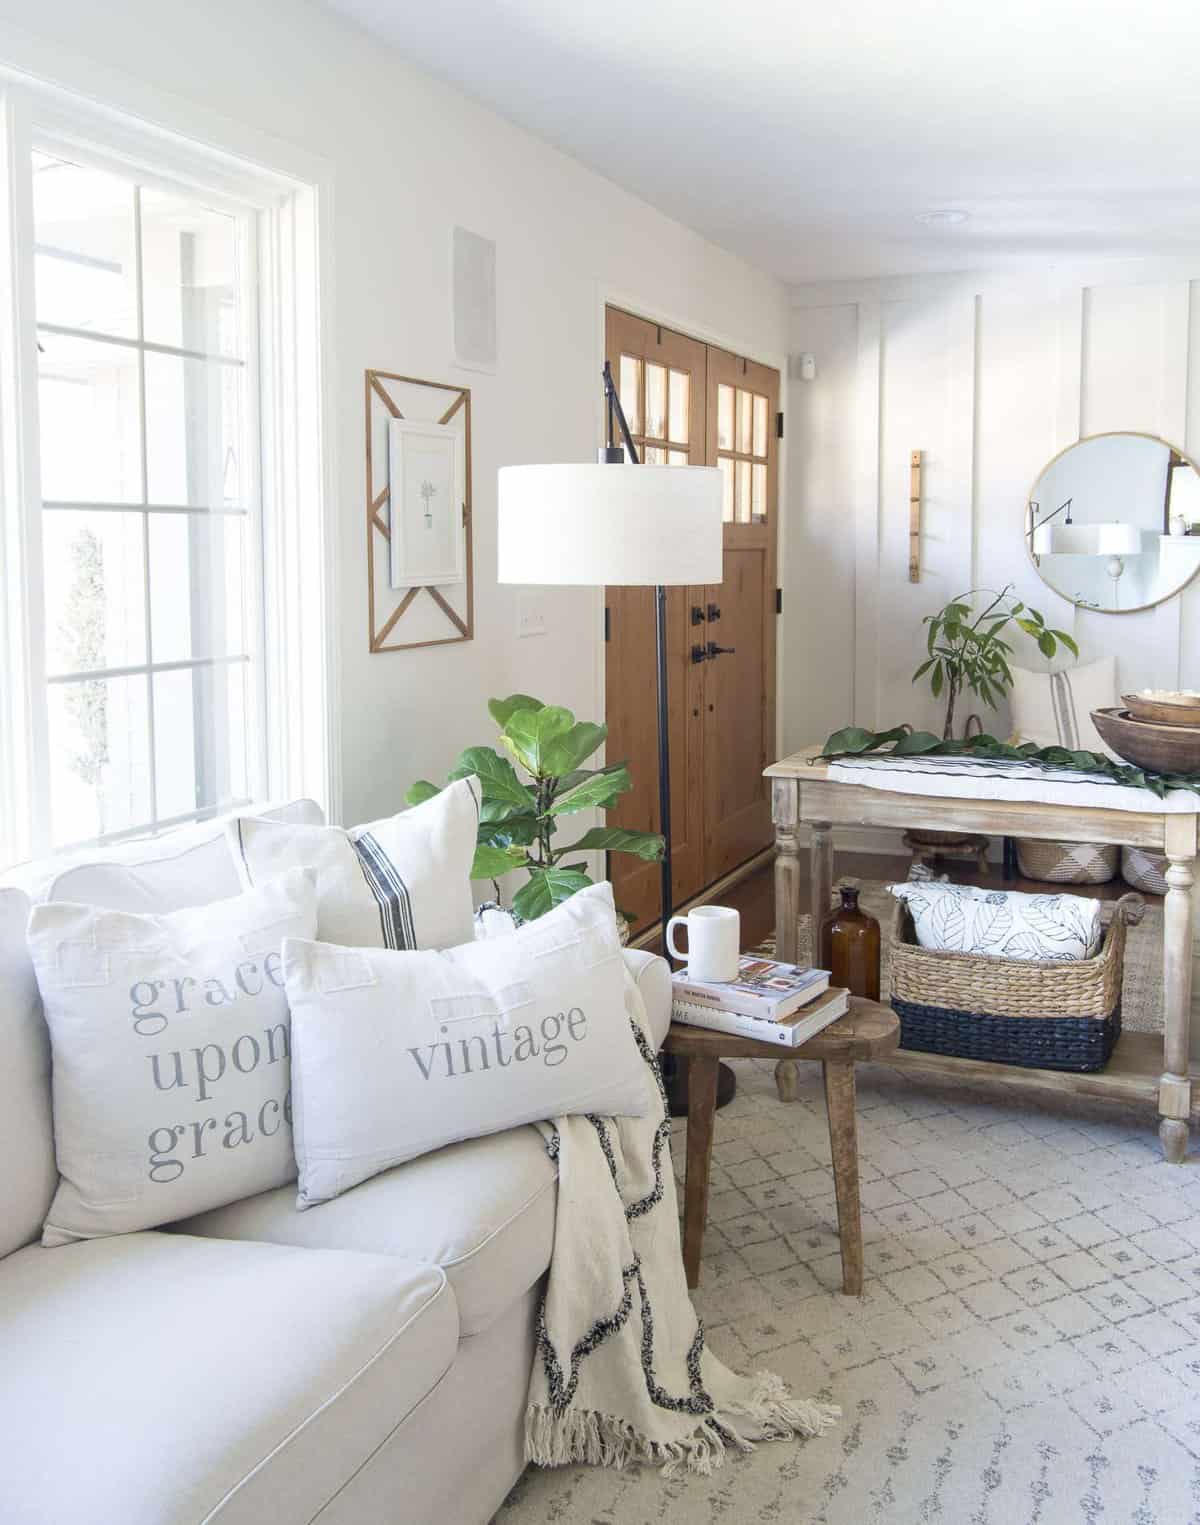 Do you need a change of pace but don't want to buy new? Change up your layout! Today I'm sharing two ways to style farmhouse living room furniture! #fromhousetohaven #livingroomfurniture #livingroomdesign #coffeetable